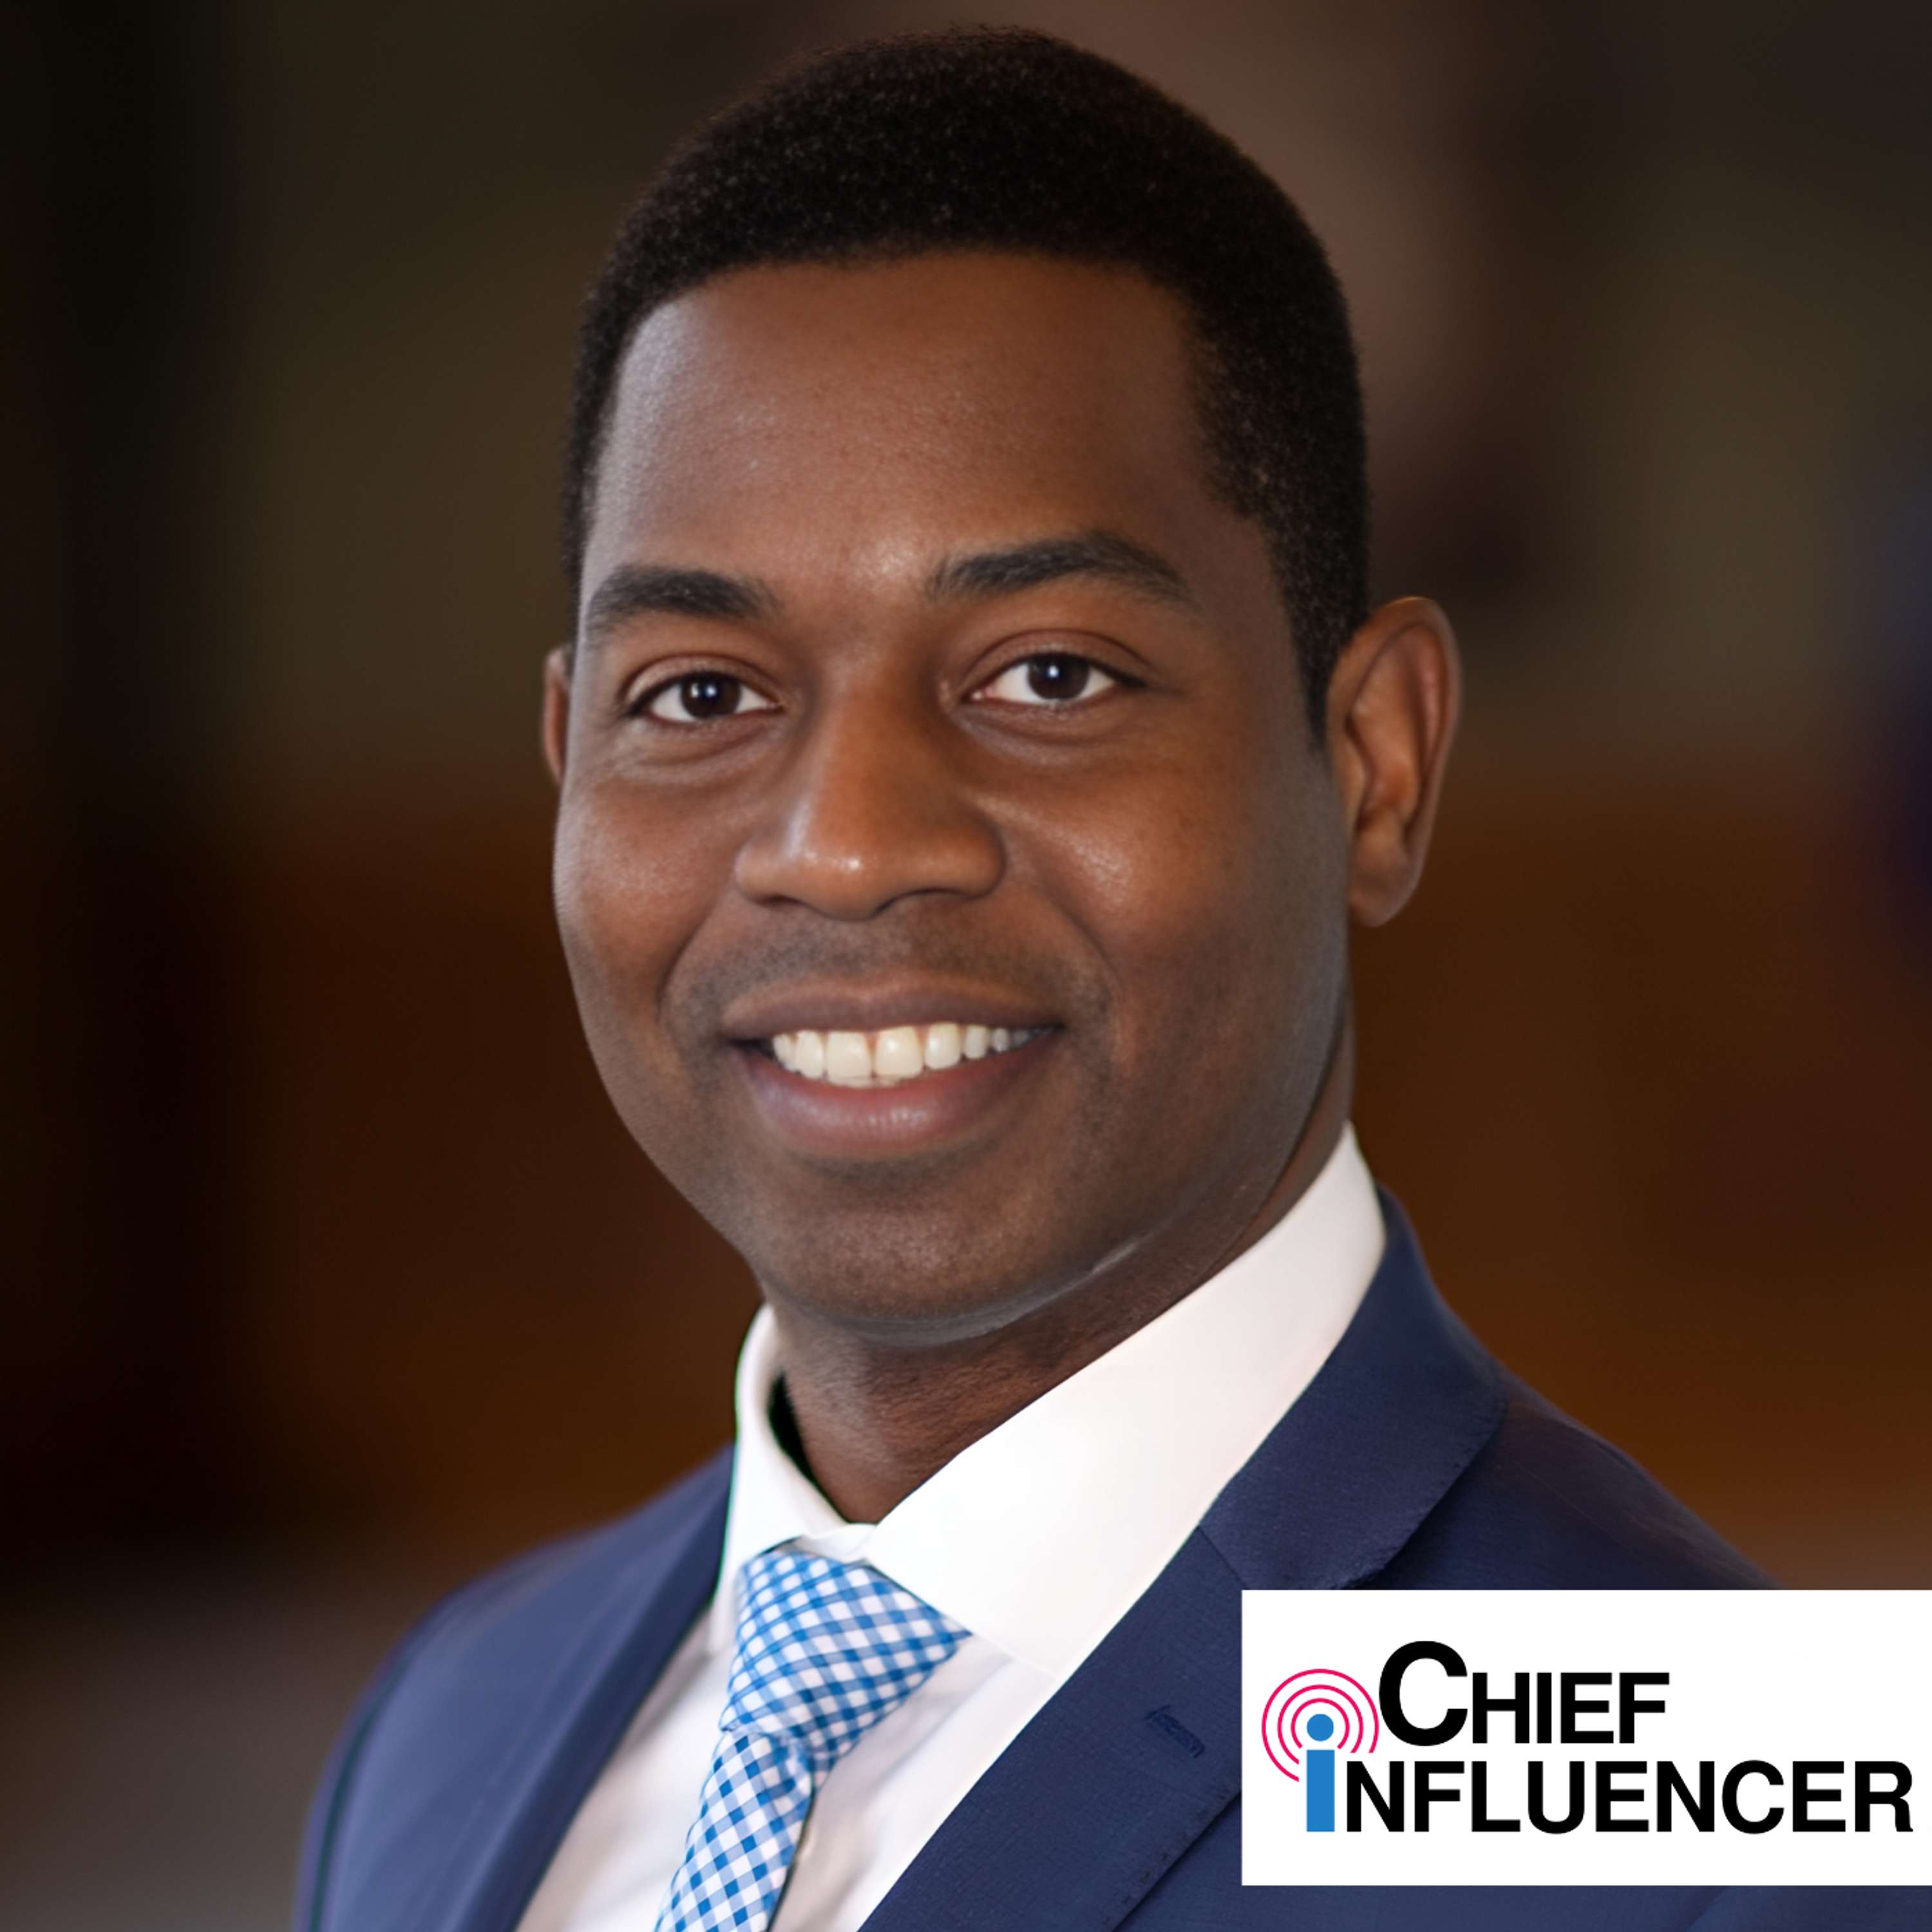 Dr. Gregory Fowler On How To Meet Today's Students Where They Are - Chief Influencer - Episode # 057